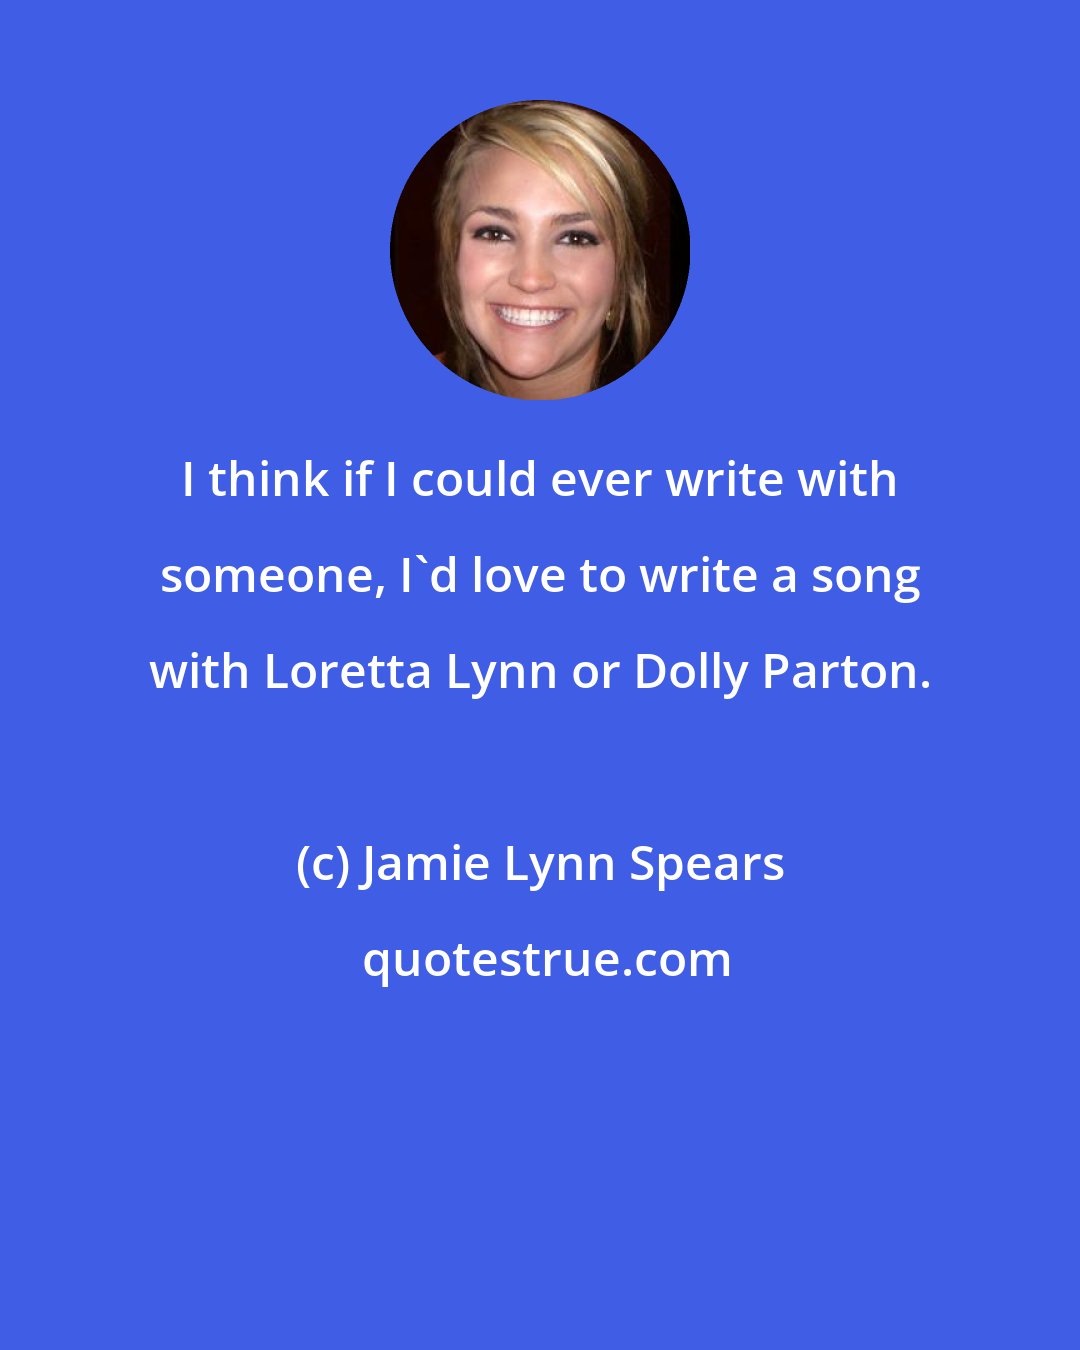 Jamie Lynn Spears: I think if I could ever write with someone, I'd love to write a song with Loretta Lynn or Dolly Parton.